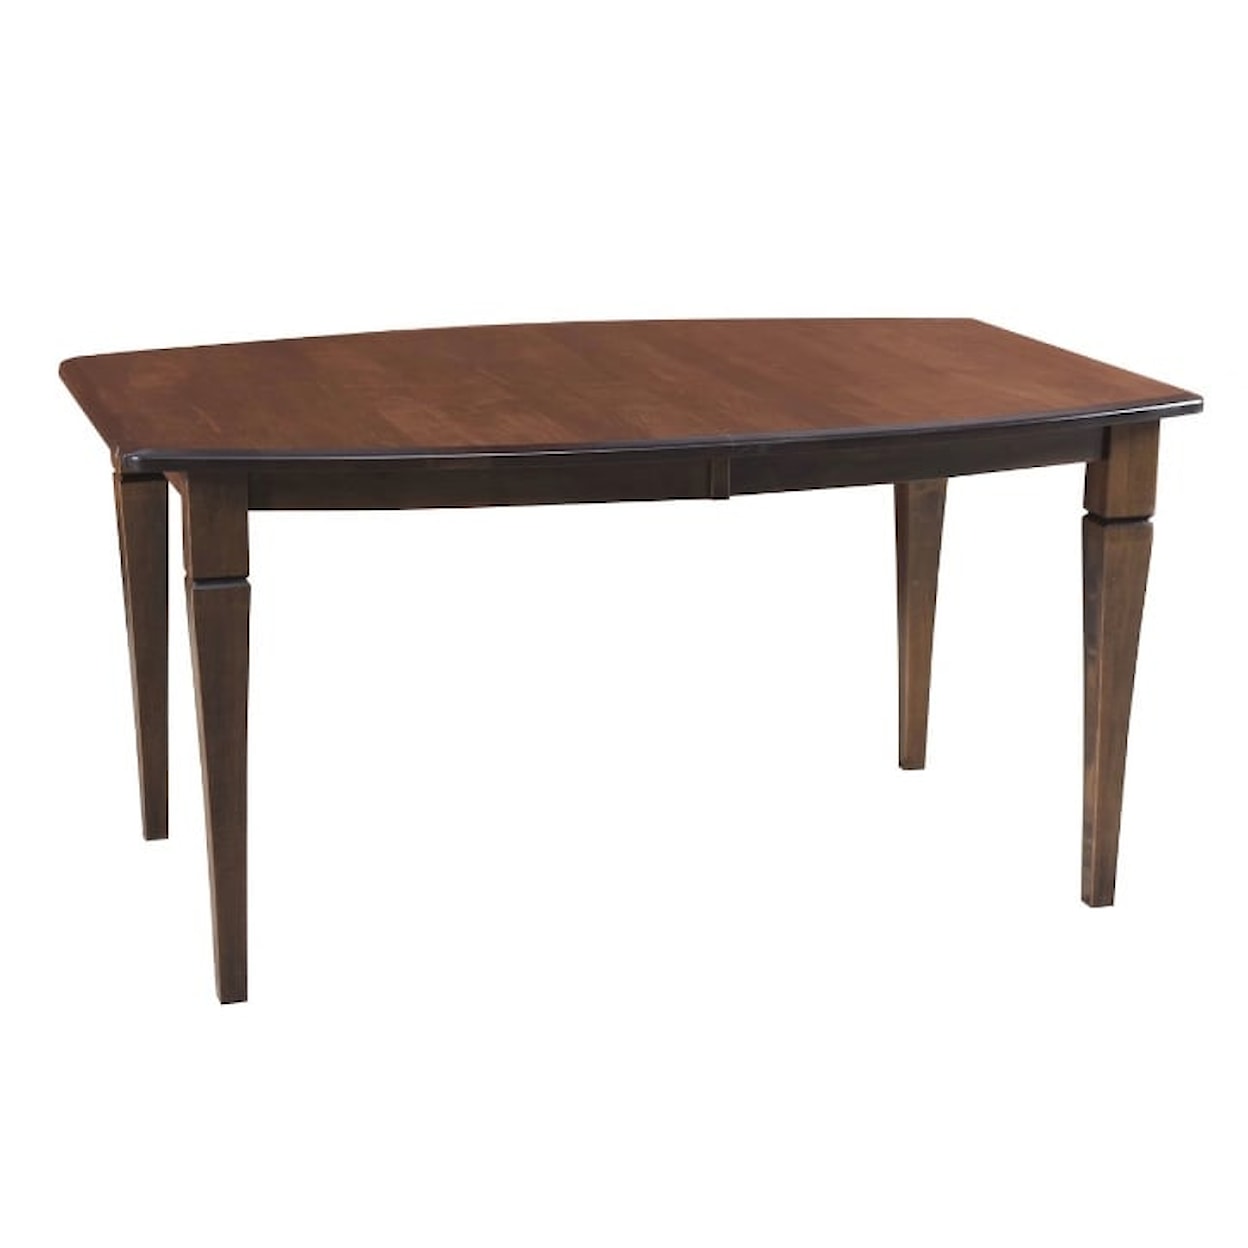 Archbold Furniture Amish Essentials Casual Dining Boat Table 42" x 60"